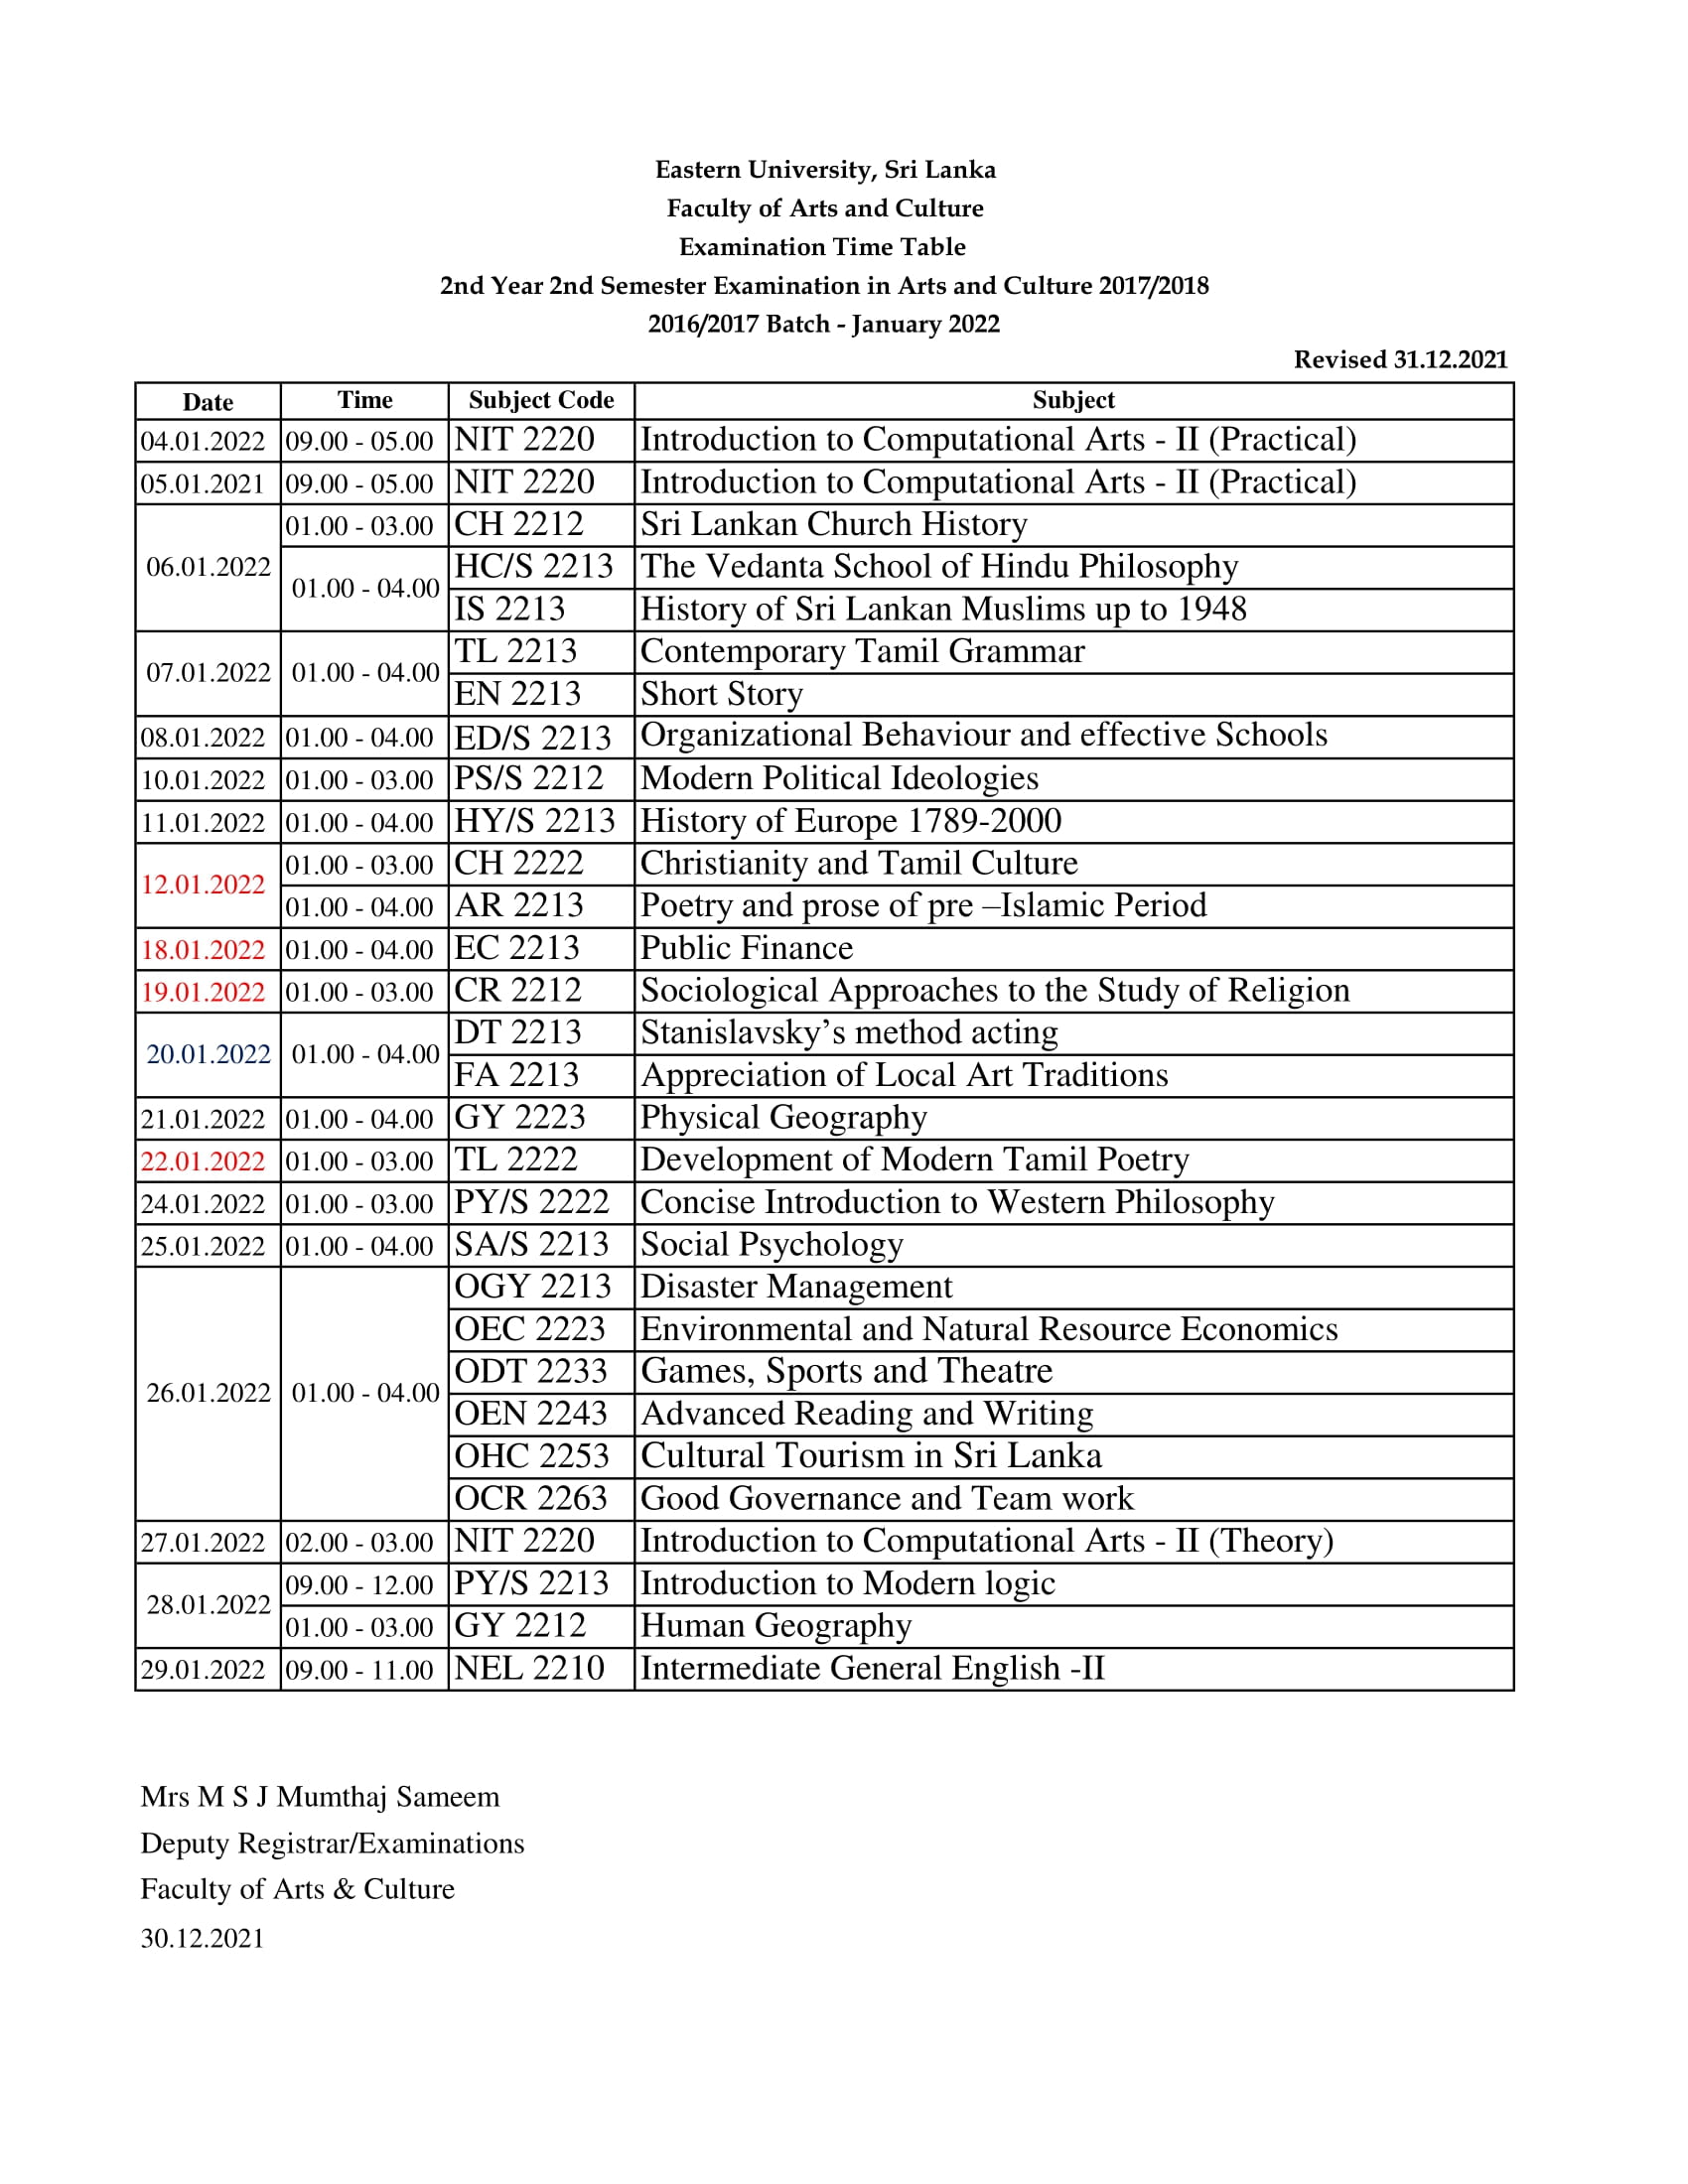 Updated exam time table 2nd year 2nd semester General, Philiosopy special and Economics Special -1.jpg